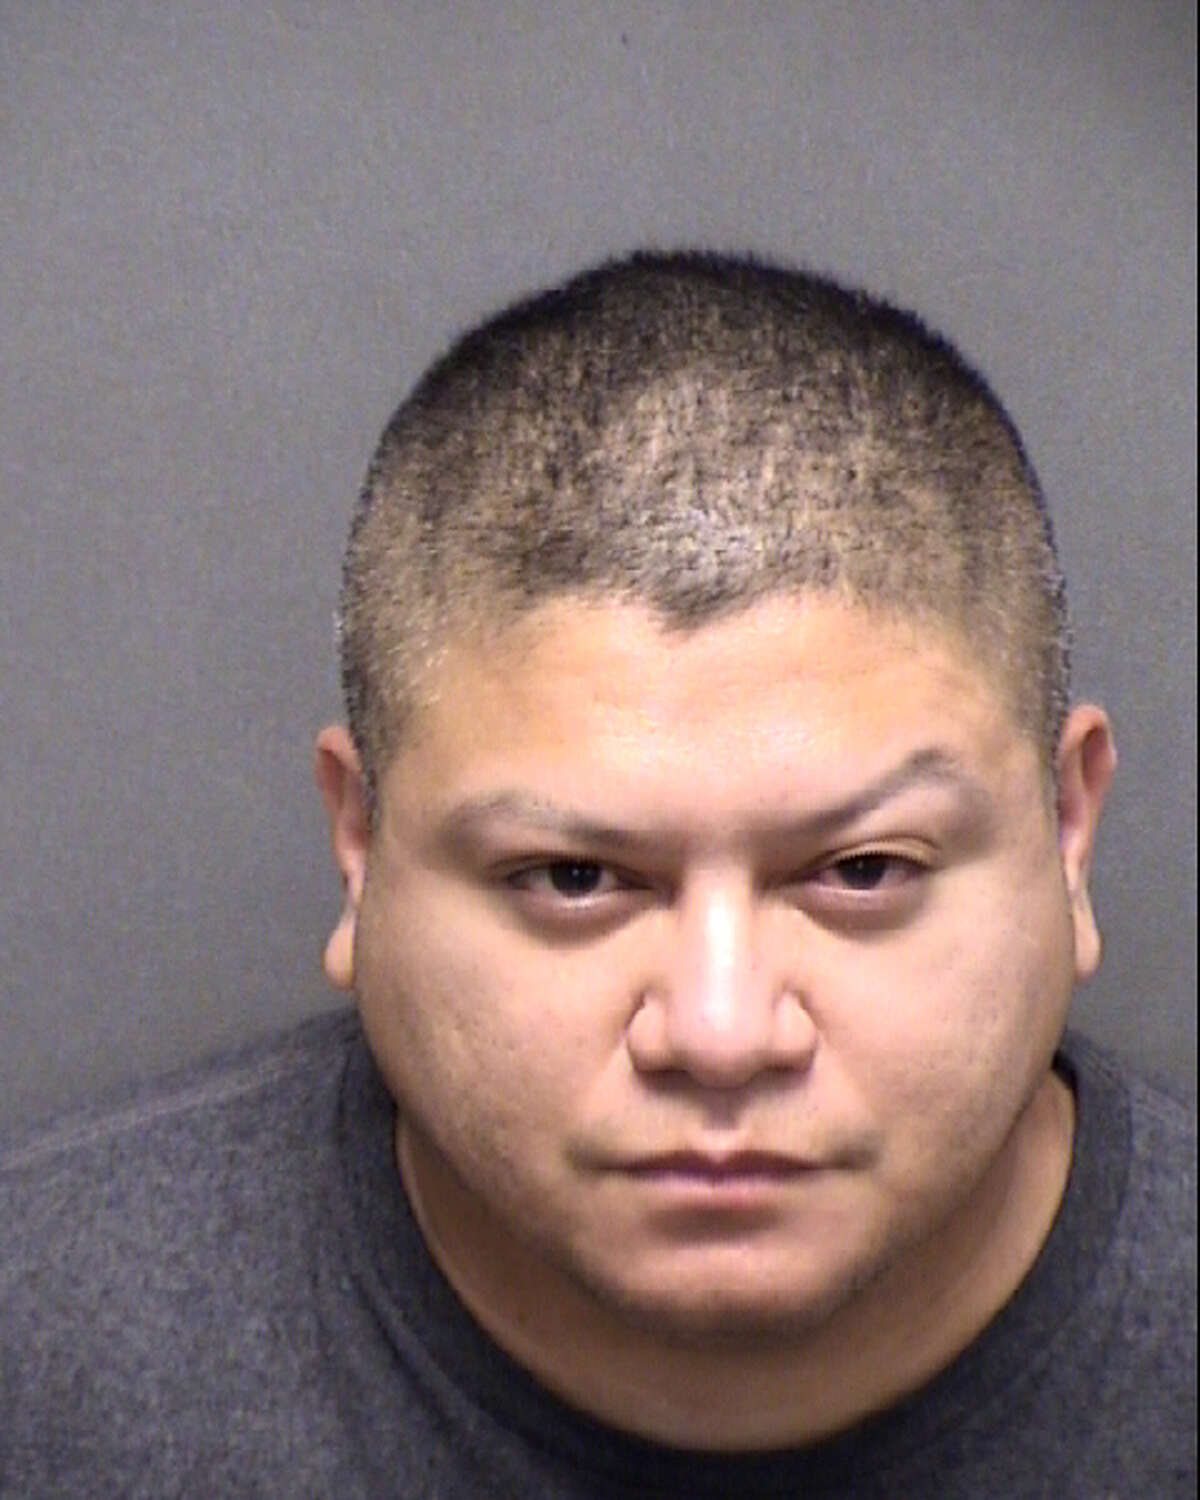 SAPD officer Humberto Zuniga Jr., 41, was arrested Wednesday on suspicion of sexual assault.